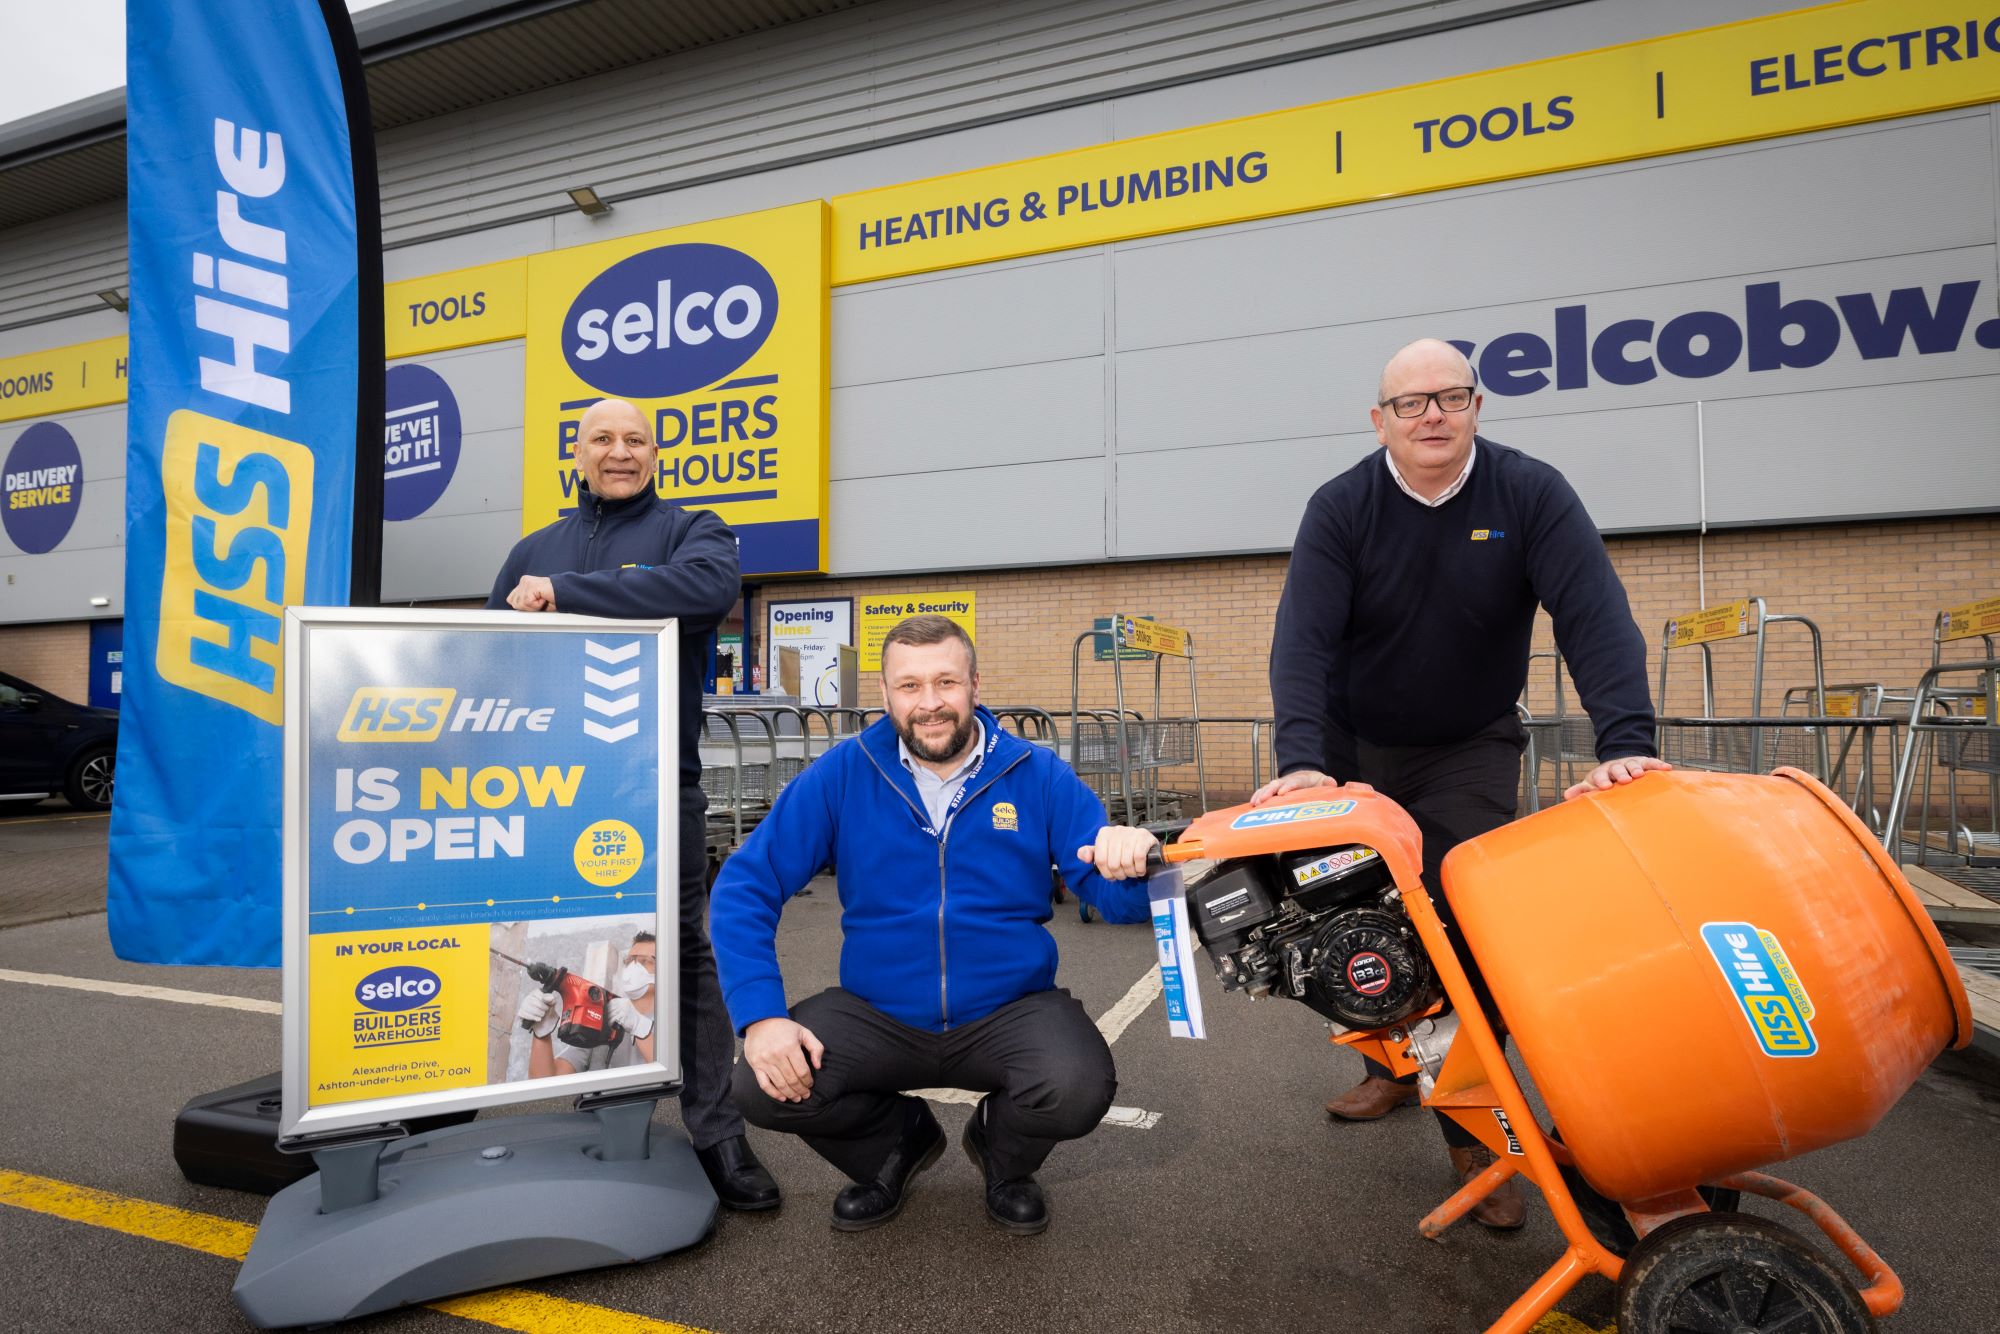 Selco Builders Warehouse has launched a new partnership with HSS Hire in a move designed to “further enhance its reputation as a ‘one-stop shop’ for tradespeople.”